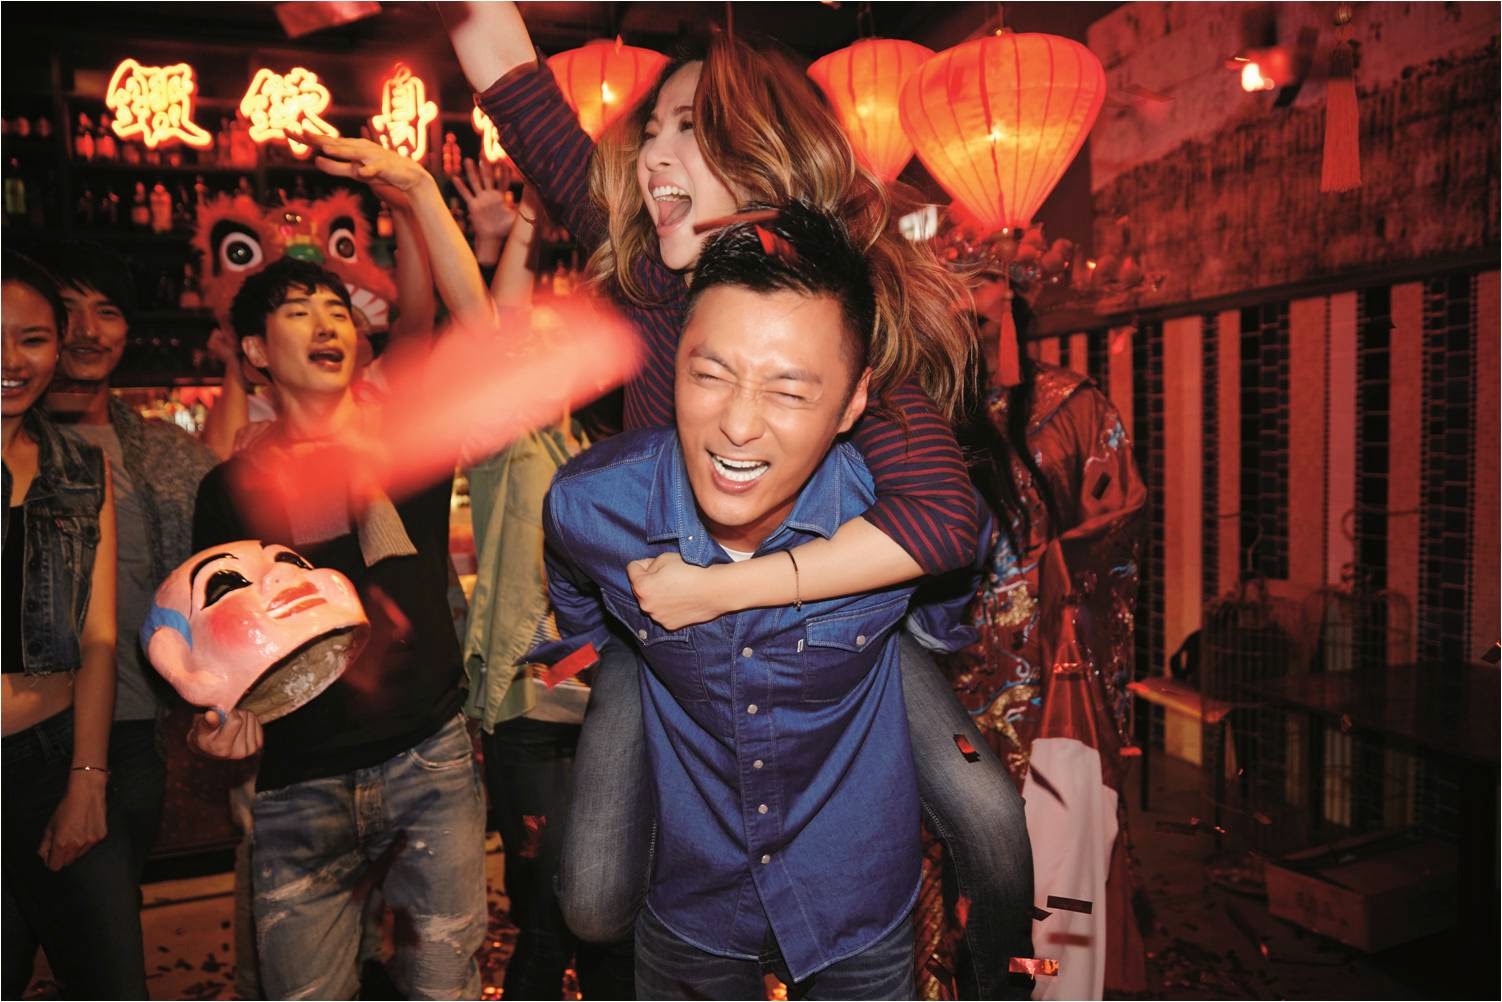 Live It Up with Levi’s 2015 Chinese New Year Edition, Live It Up, Levi's Chinese New Year 2015 Edition, Levi's, Levi's Malaysia, Levi's Skinny Jeans, Shawn Yue, Ai Fei